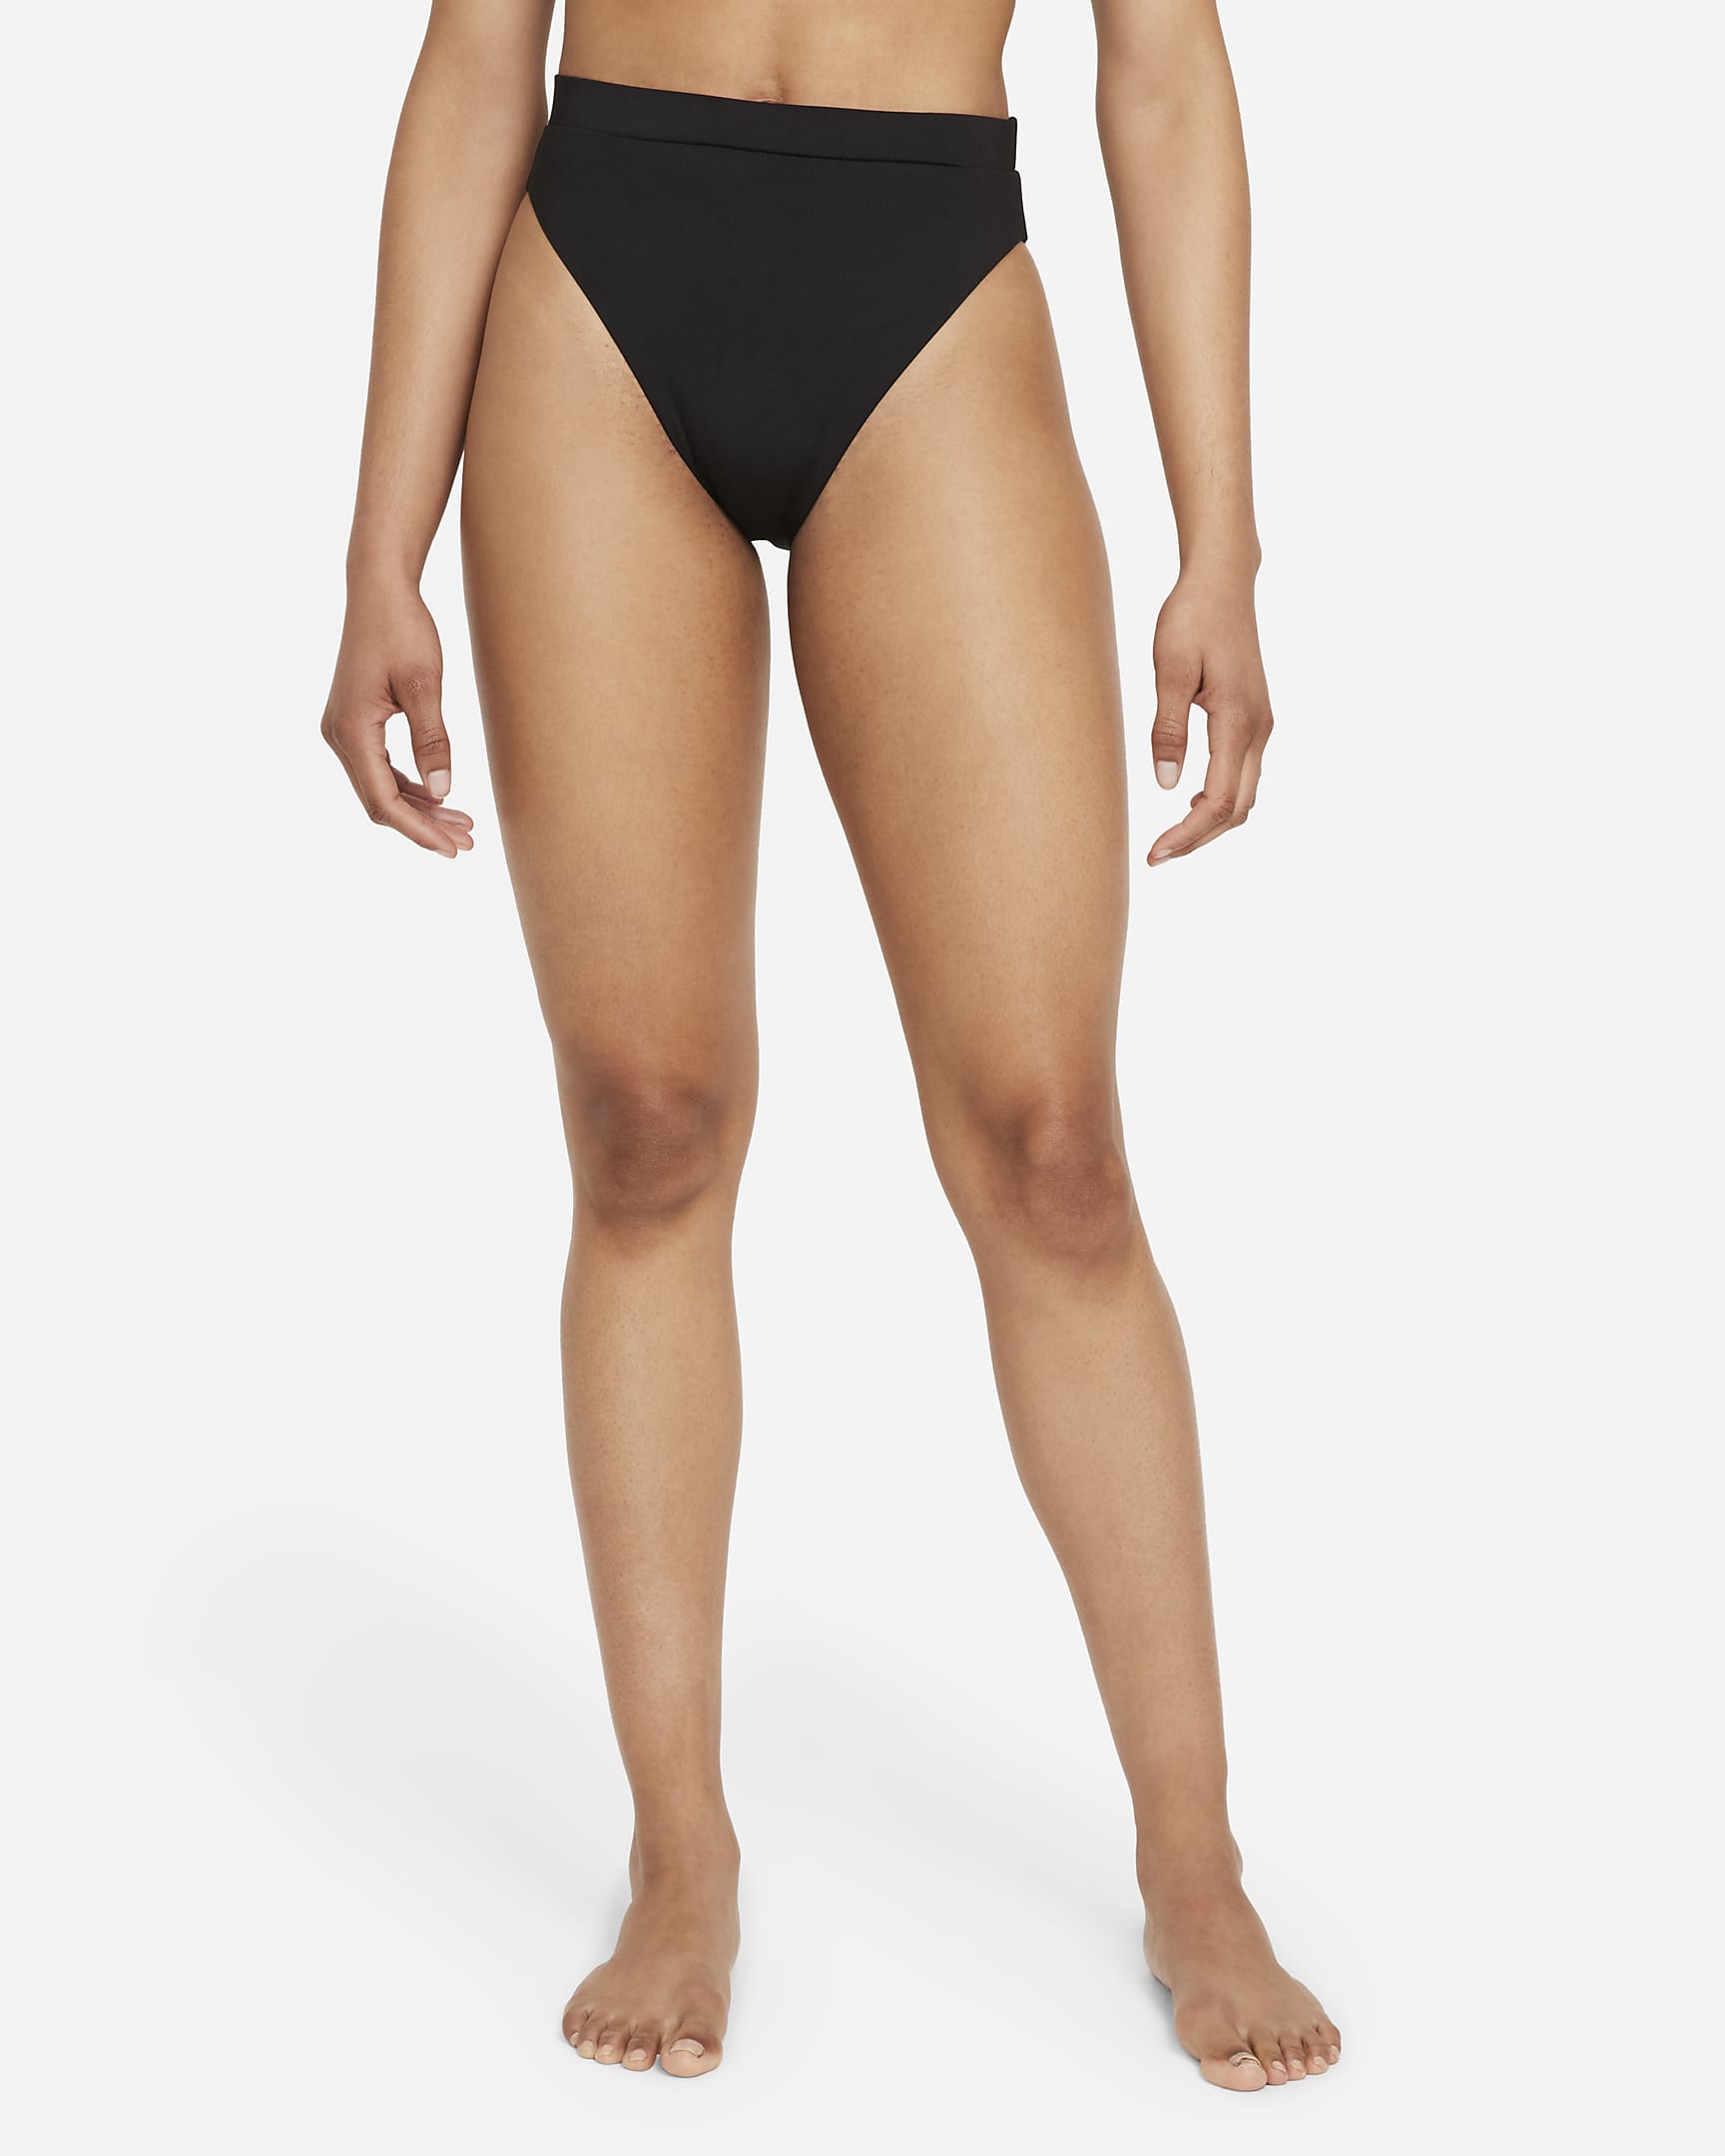 Nike Essential Women's High-Waisted Swimming Bottoms - Black/White